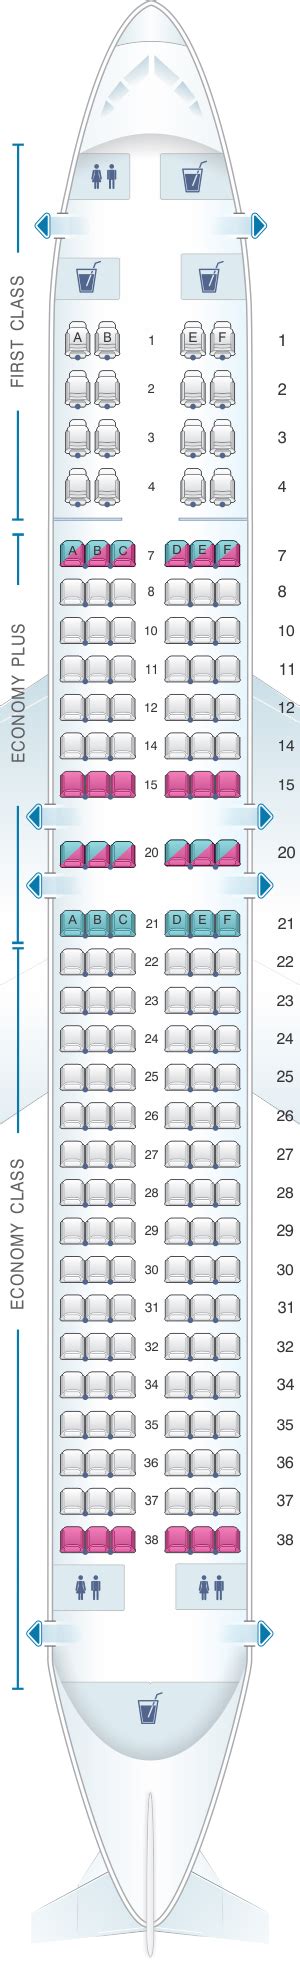 United Airlines Boeing 737 800 Seat Map Elcho Table